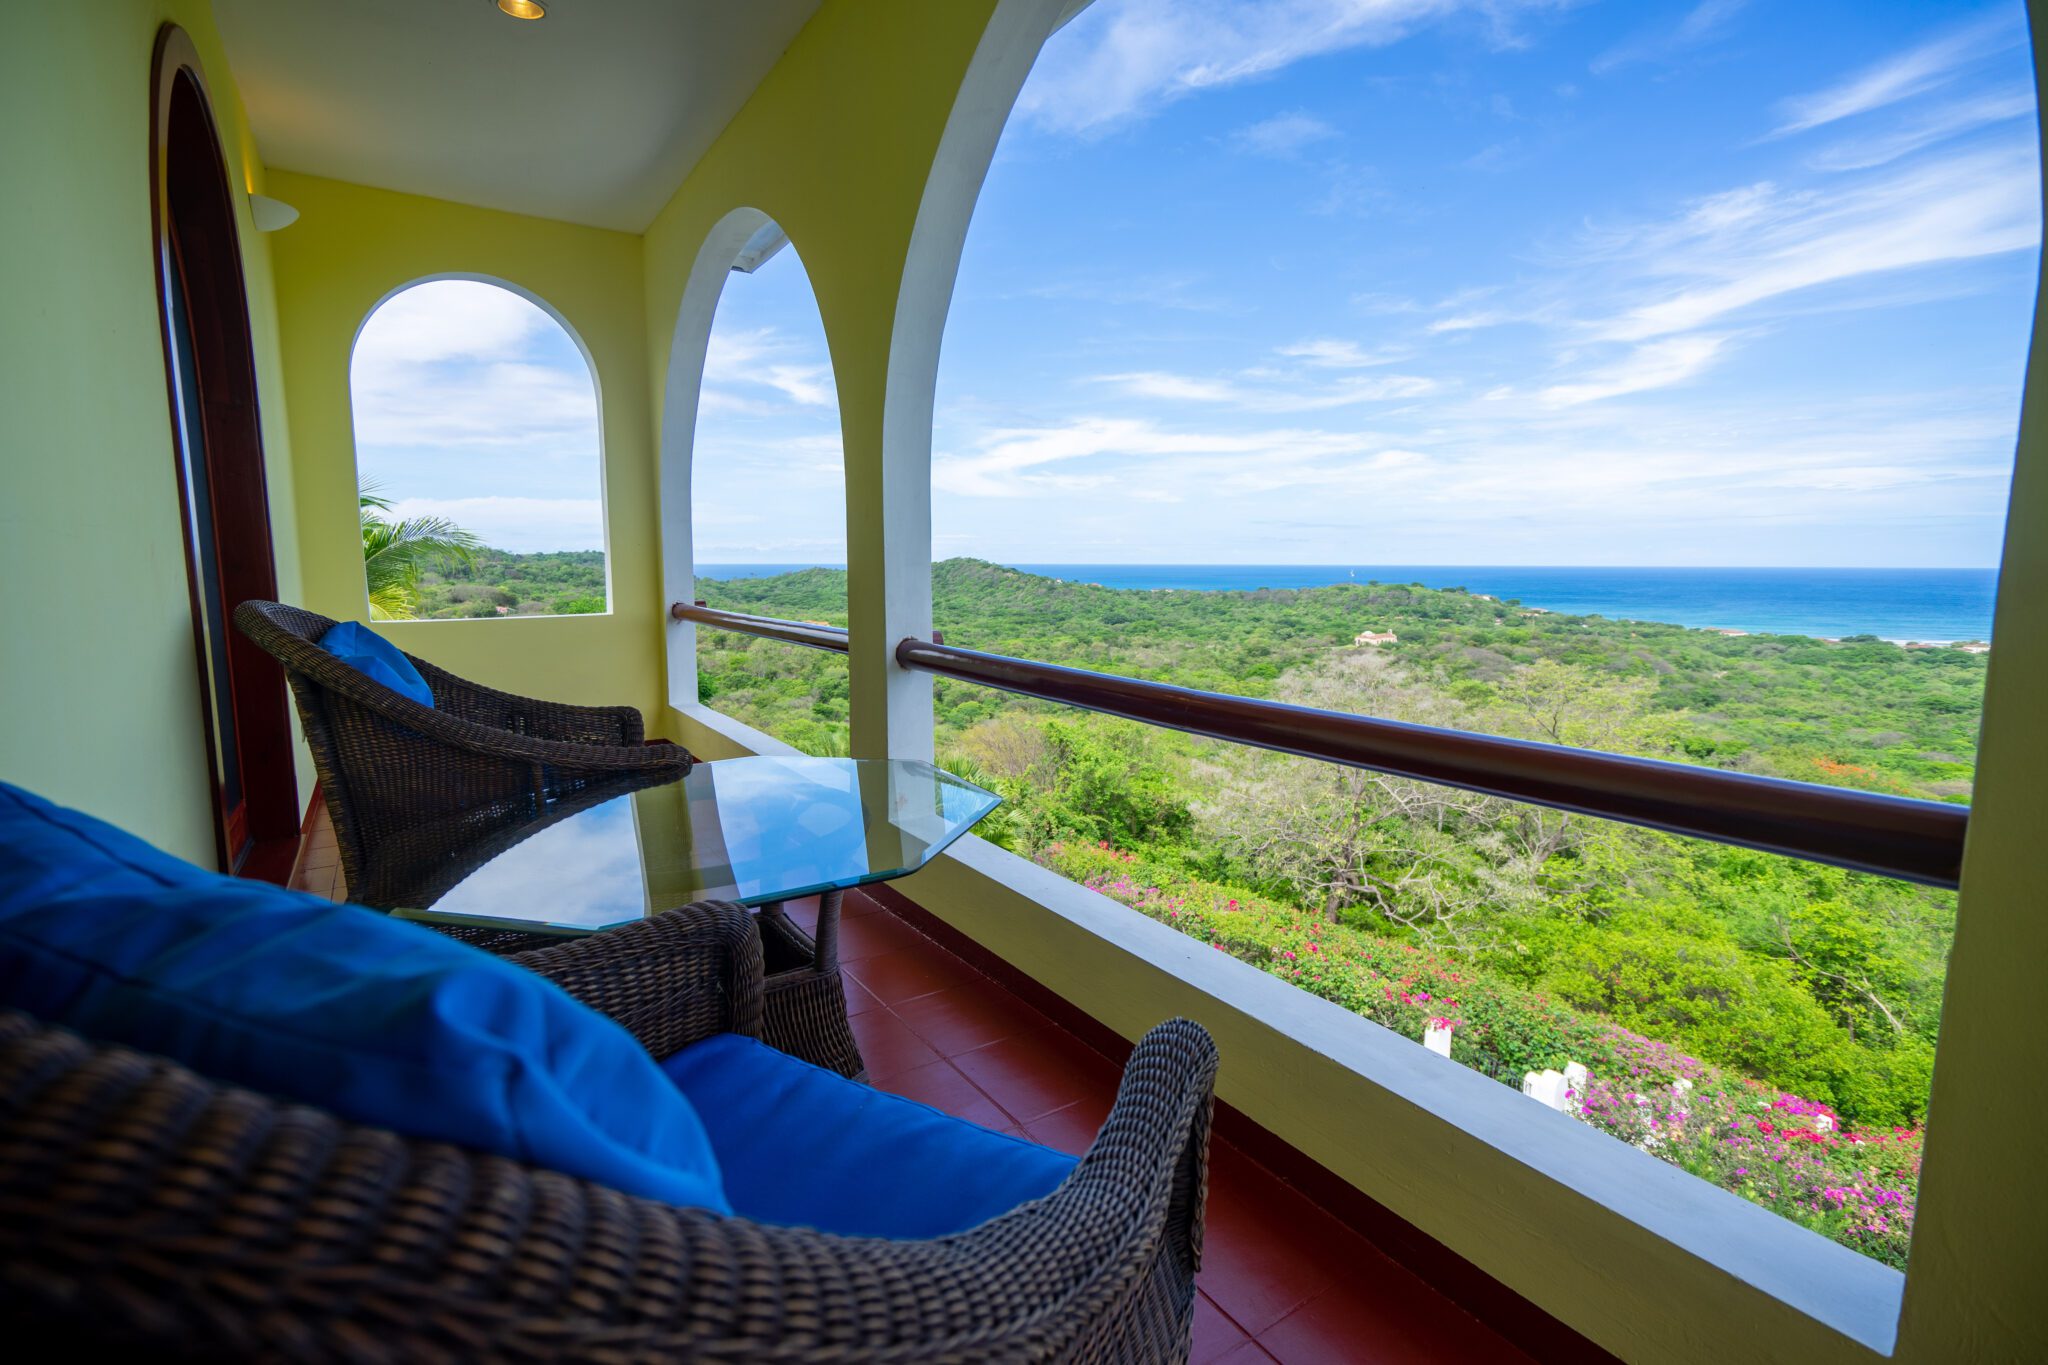 http://view%20of%20the%20ocean%20from%20a%20Rancho%20Santana%20Property%20for%20Sale%20in%20Nicaragua%20R3